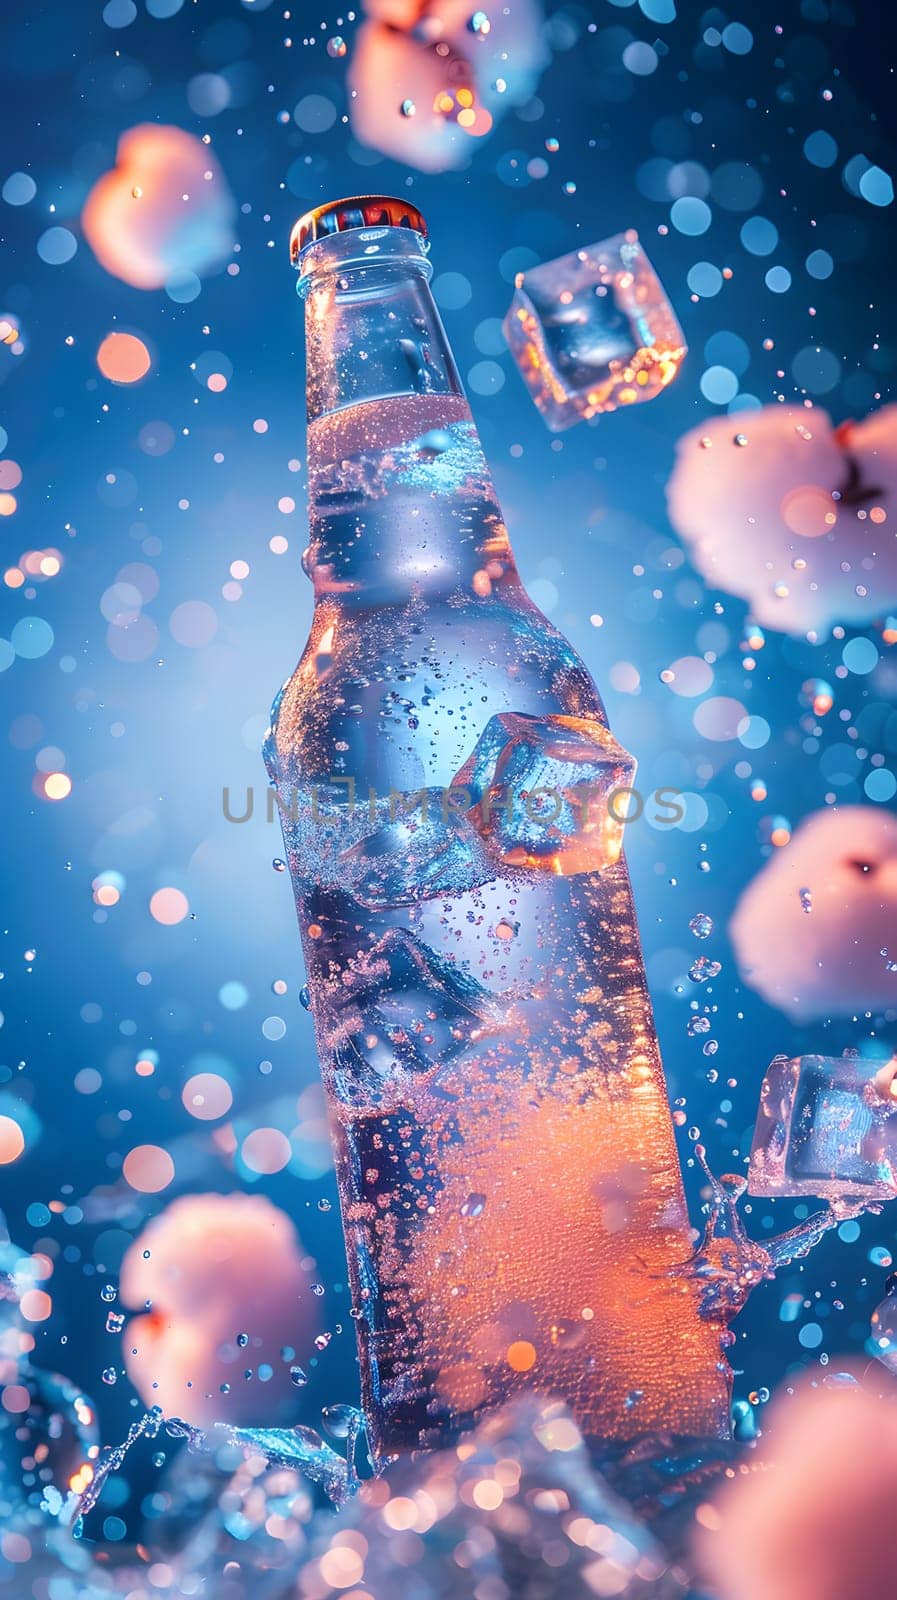 An azure bottle filled with liquid water is surrounded by ice cubes and delicate cotton flowers, creating a natural environment for a refreshing drink